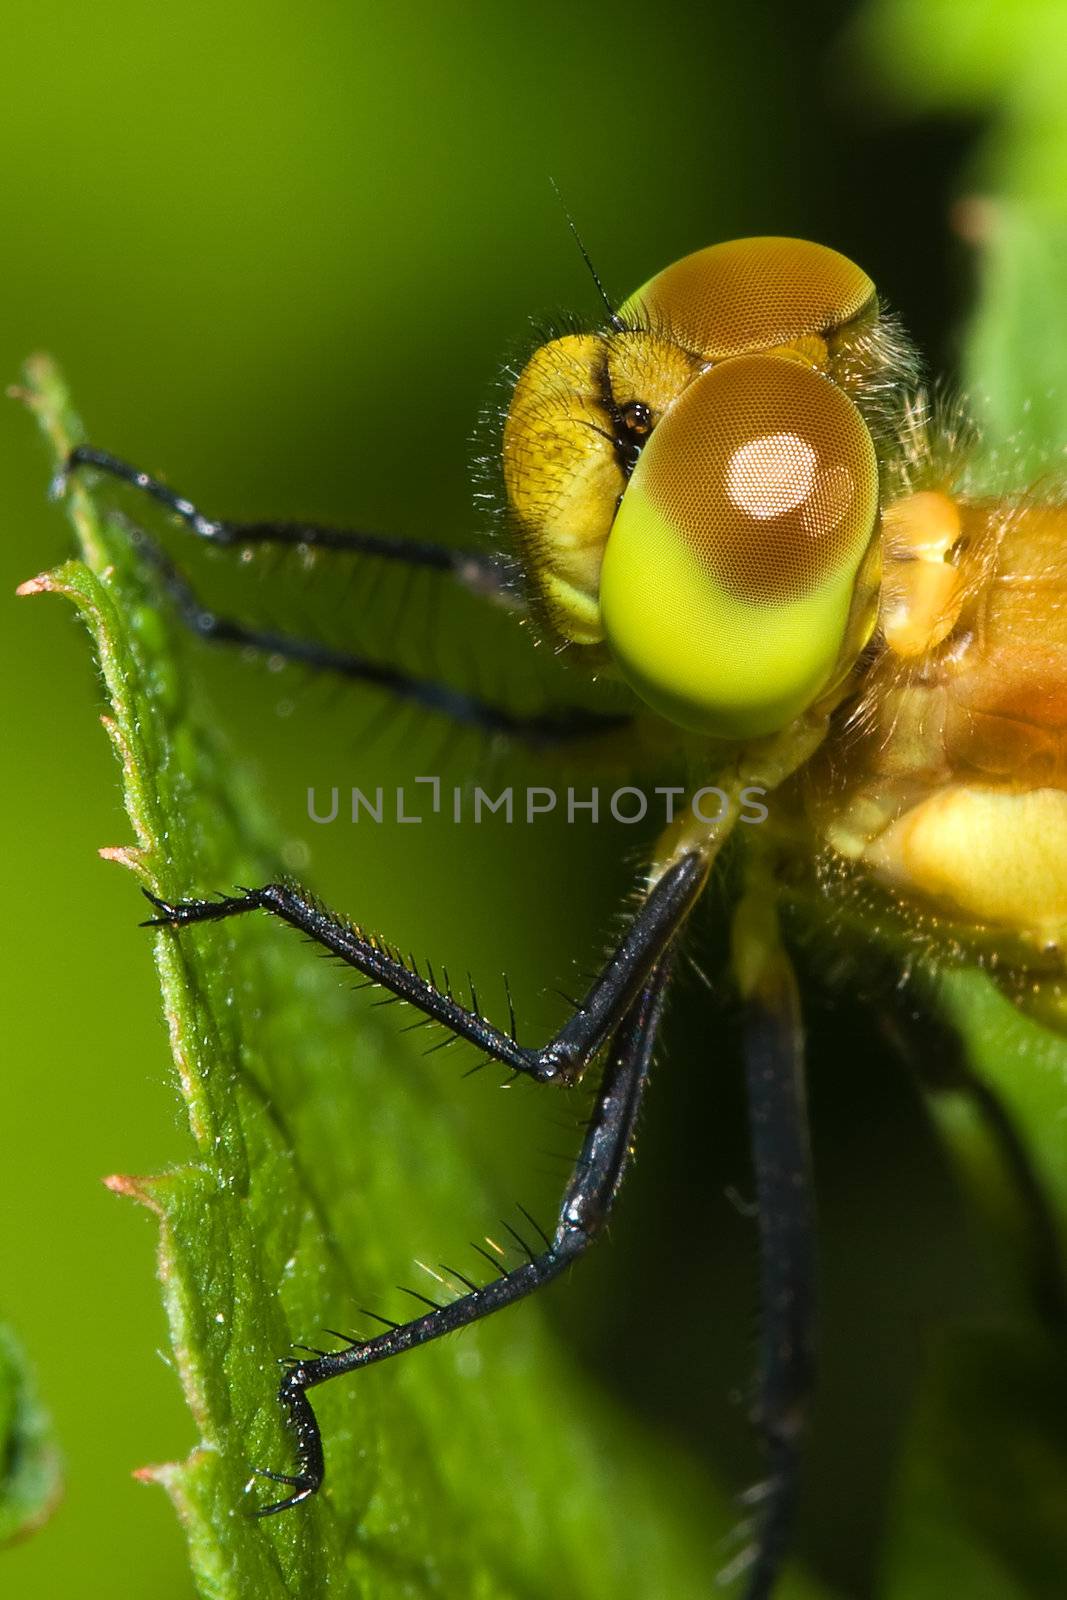 Close up of a Common Darter perched on a plant leaf.